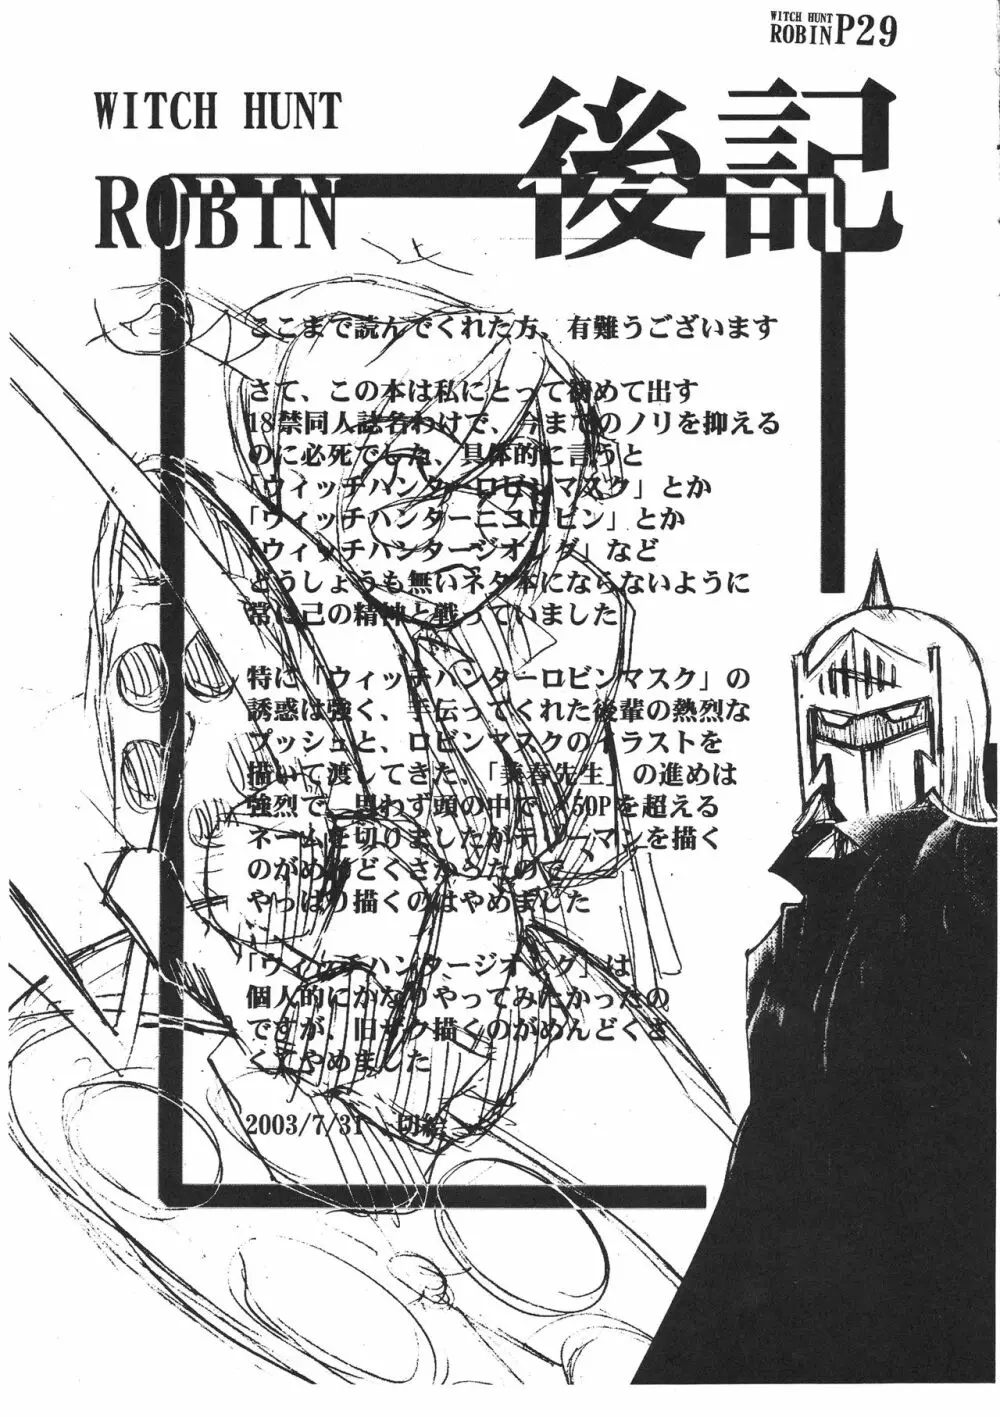 WITCH HUNT ROBIN Page.29